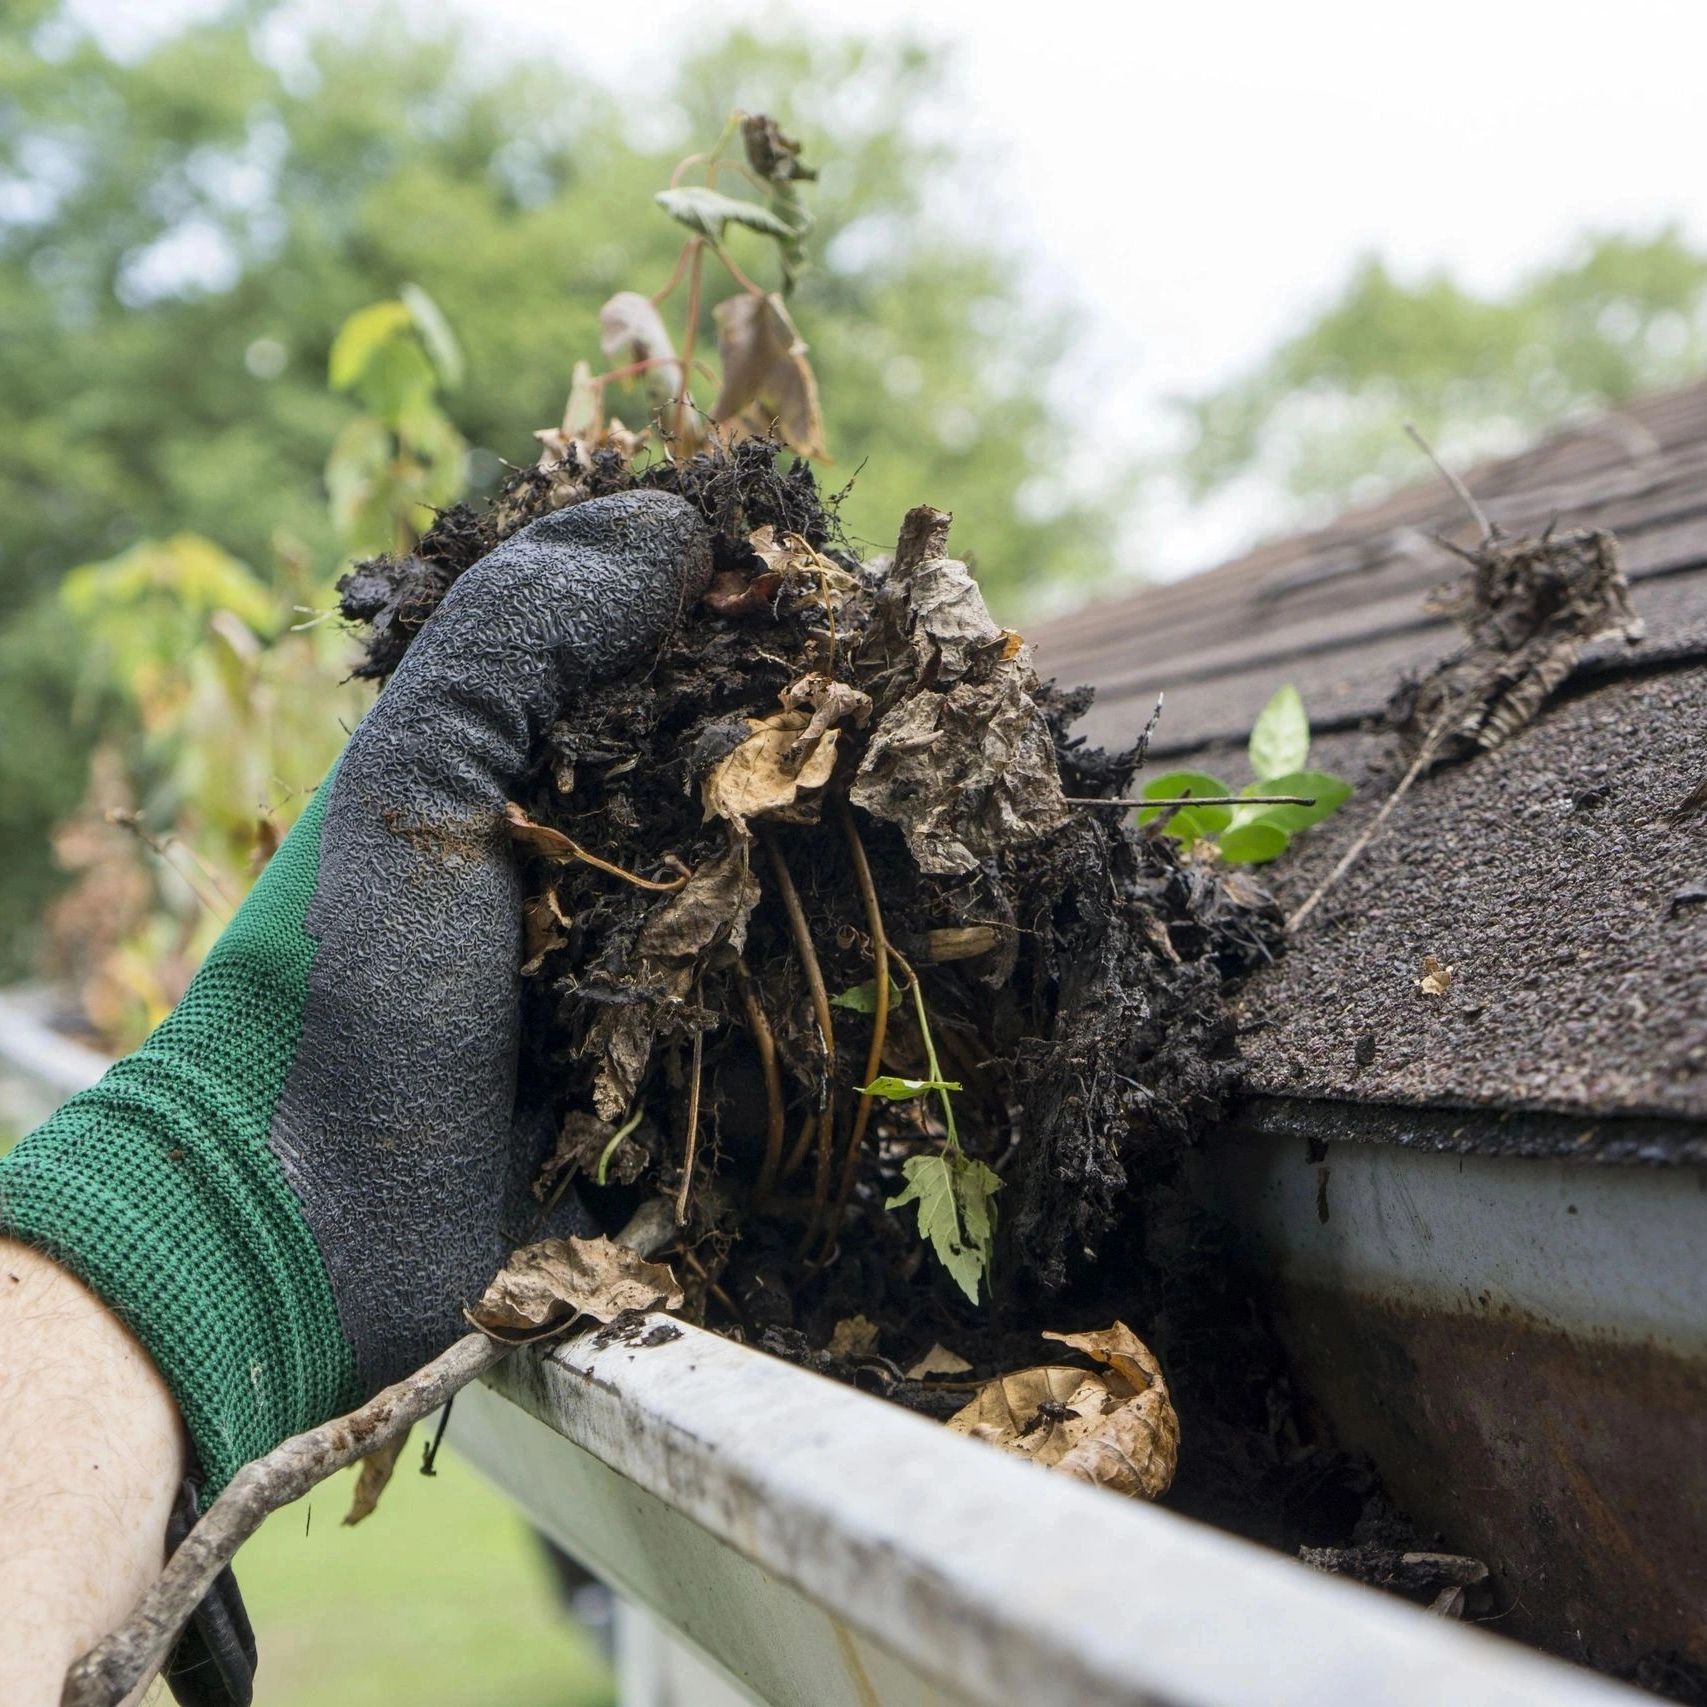 Image of a hand cleaning a gutter